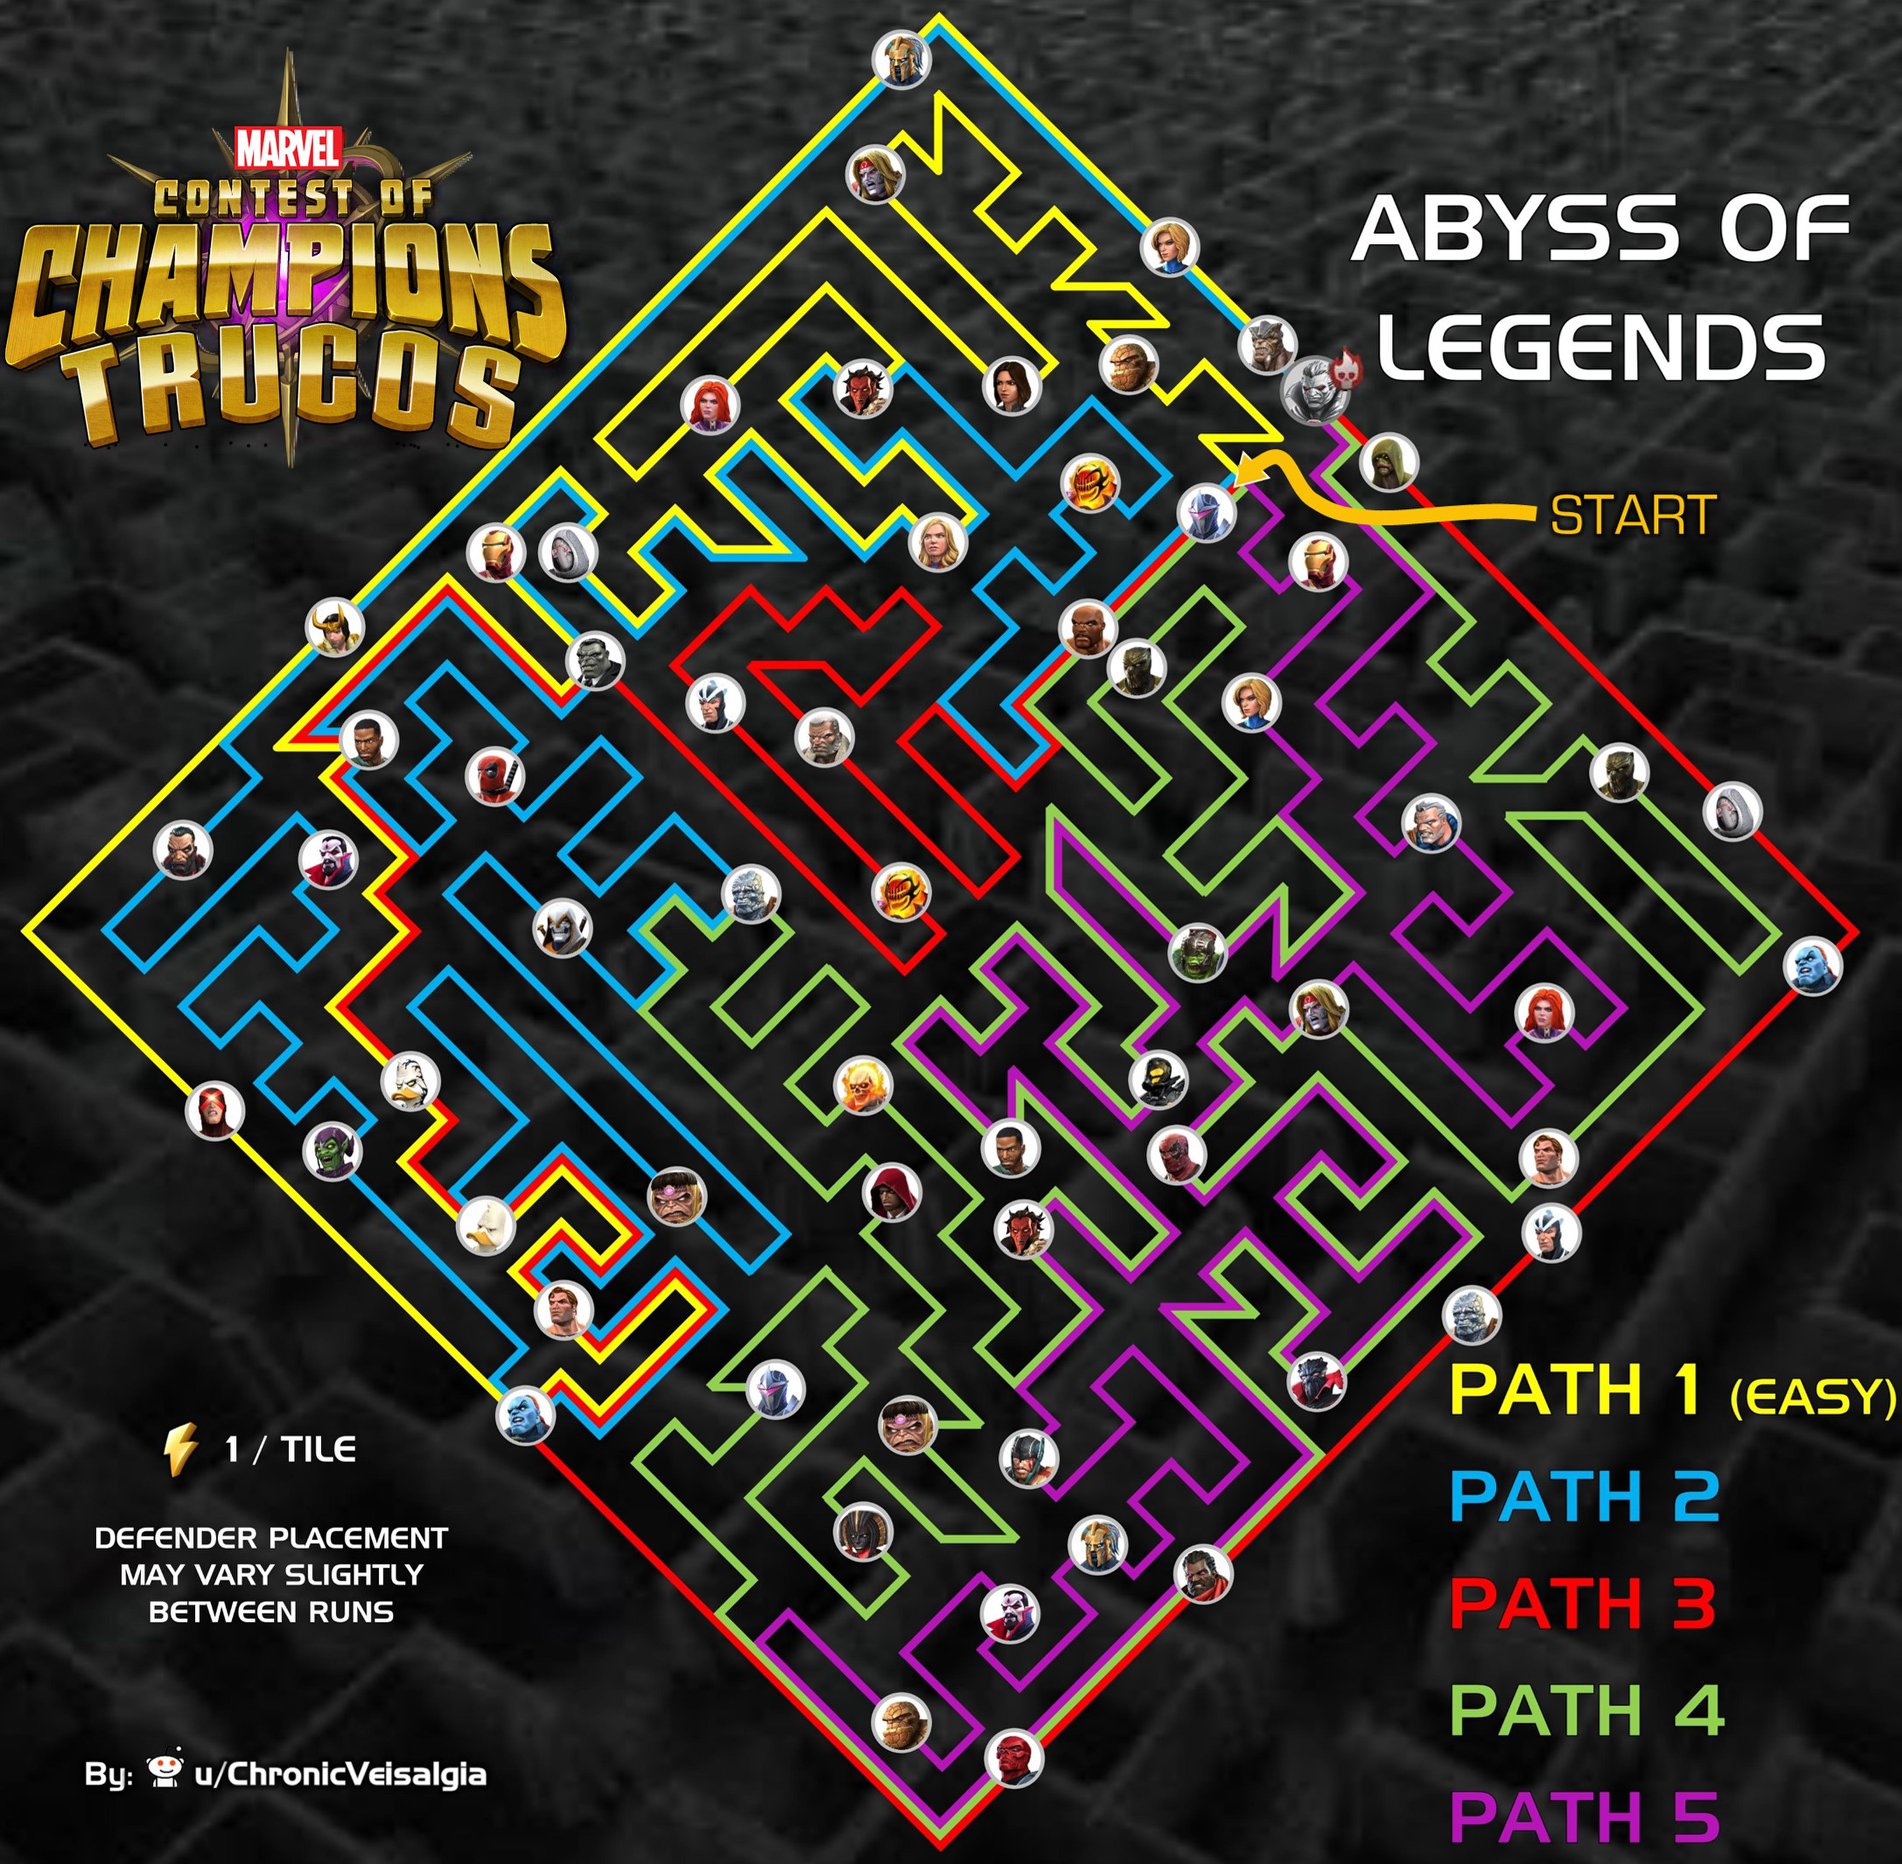 Abyss of Legends